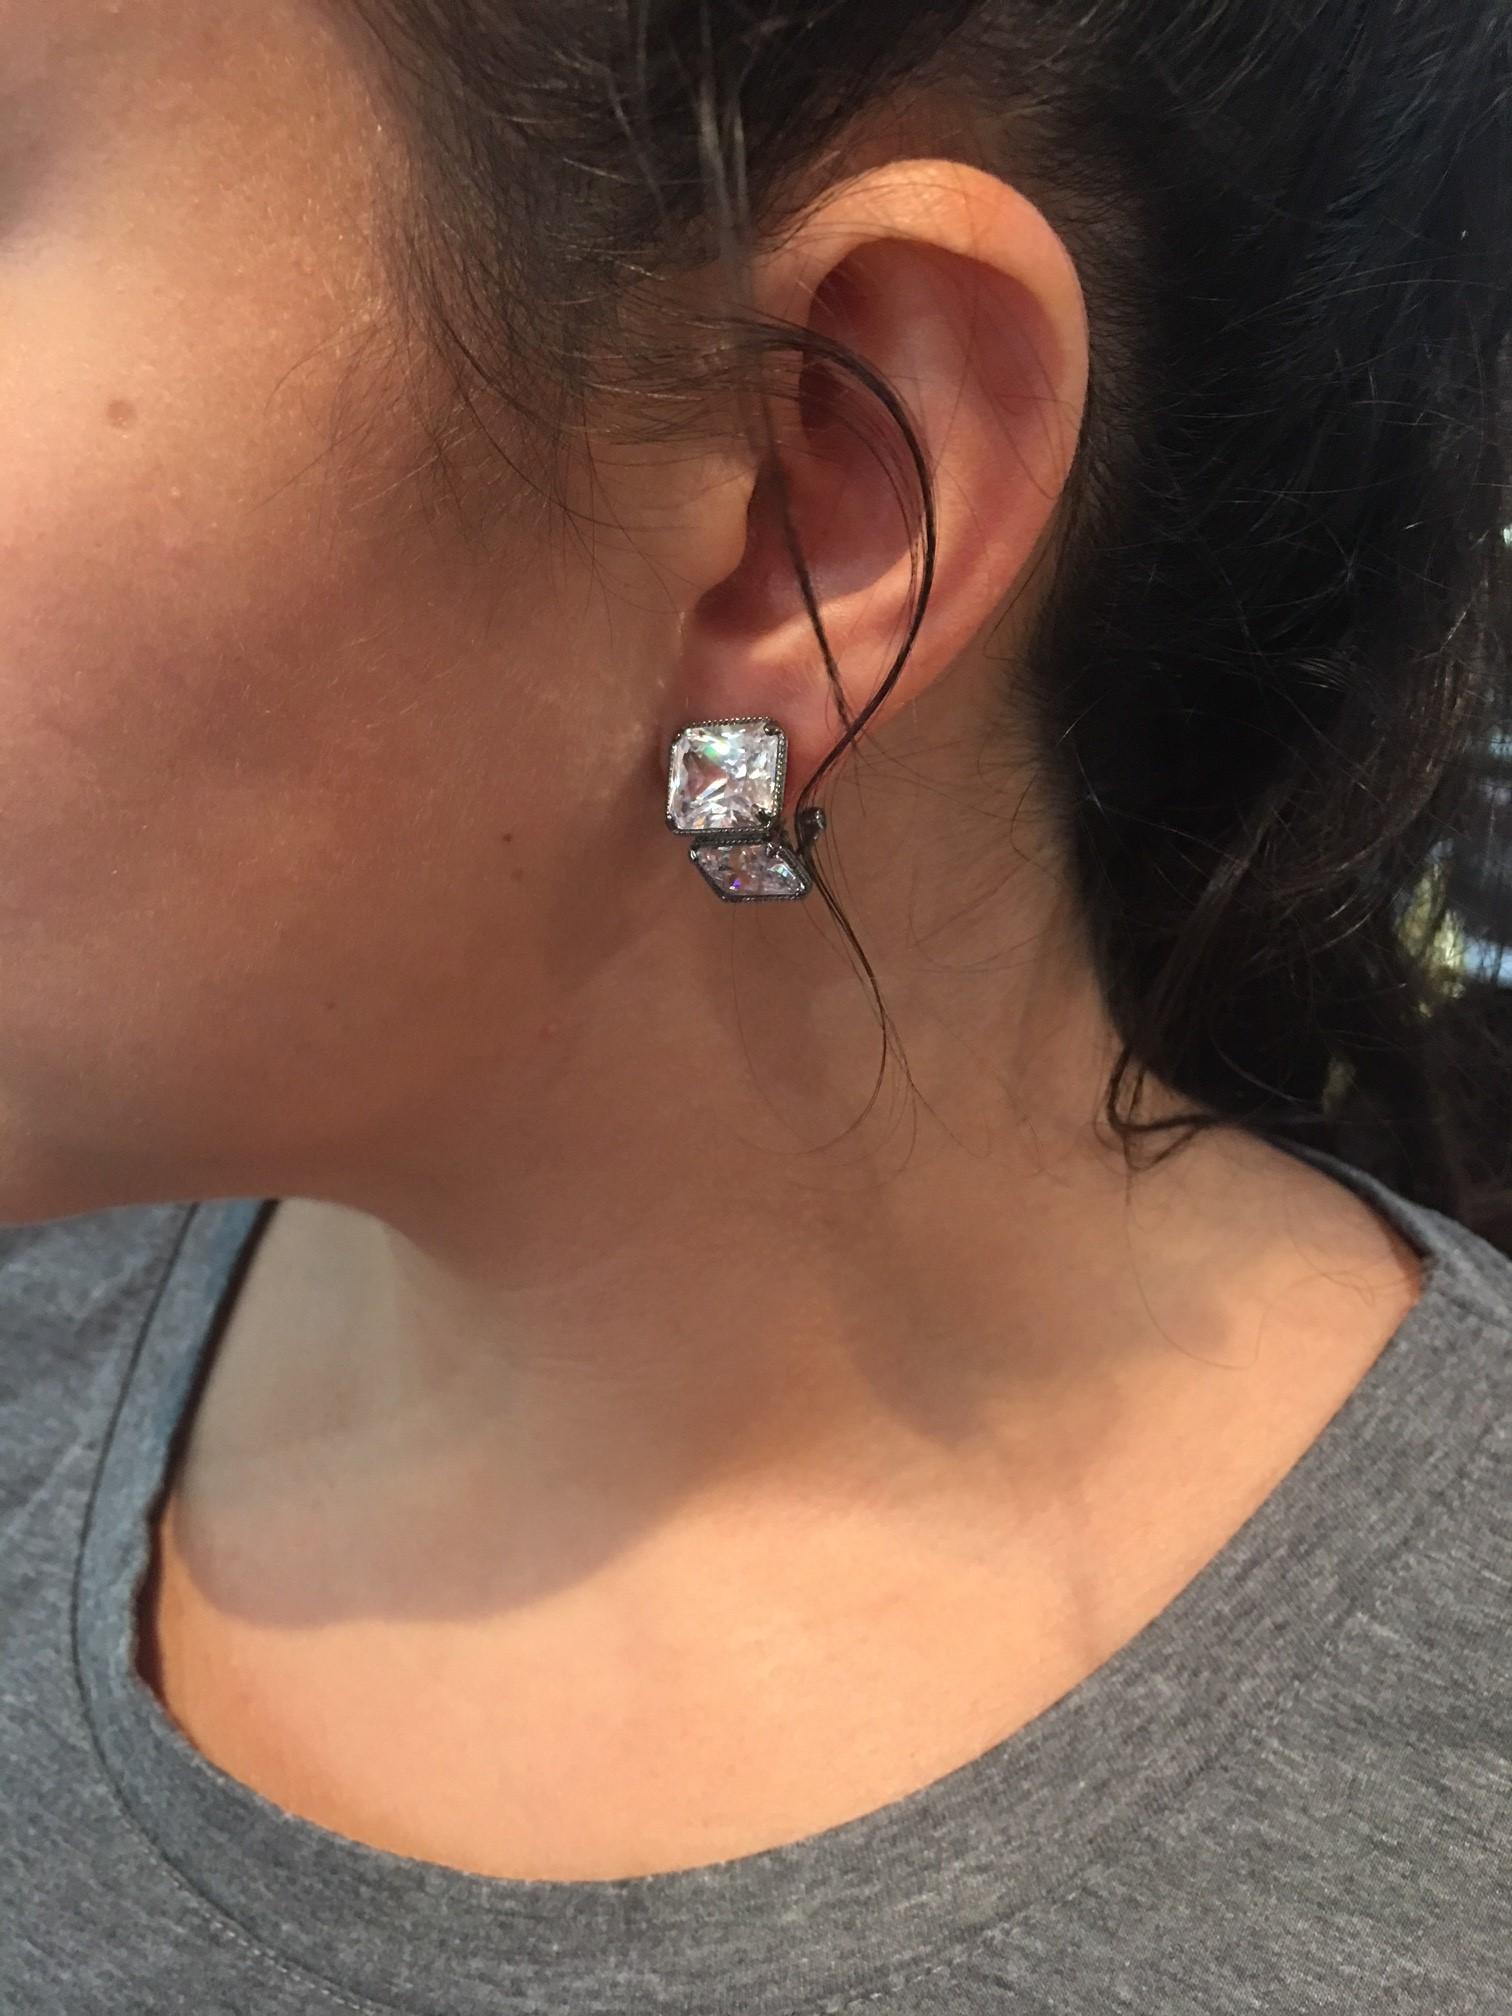 Simply Beautiful…each earring is set with one large 13.5mm x 11.5mm and one 11.5mm x 8.0 mm cushion shape faux Diamond, making a striking statement! All hand set in Sterling Silver. Approx. total length .75